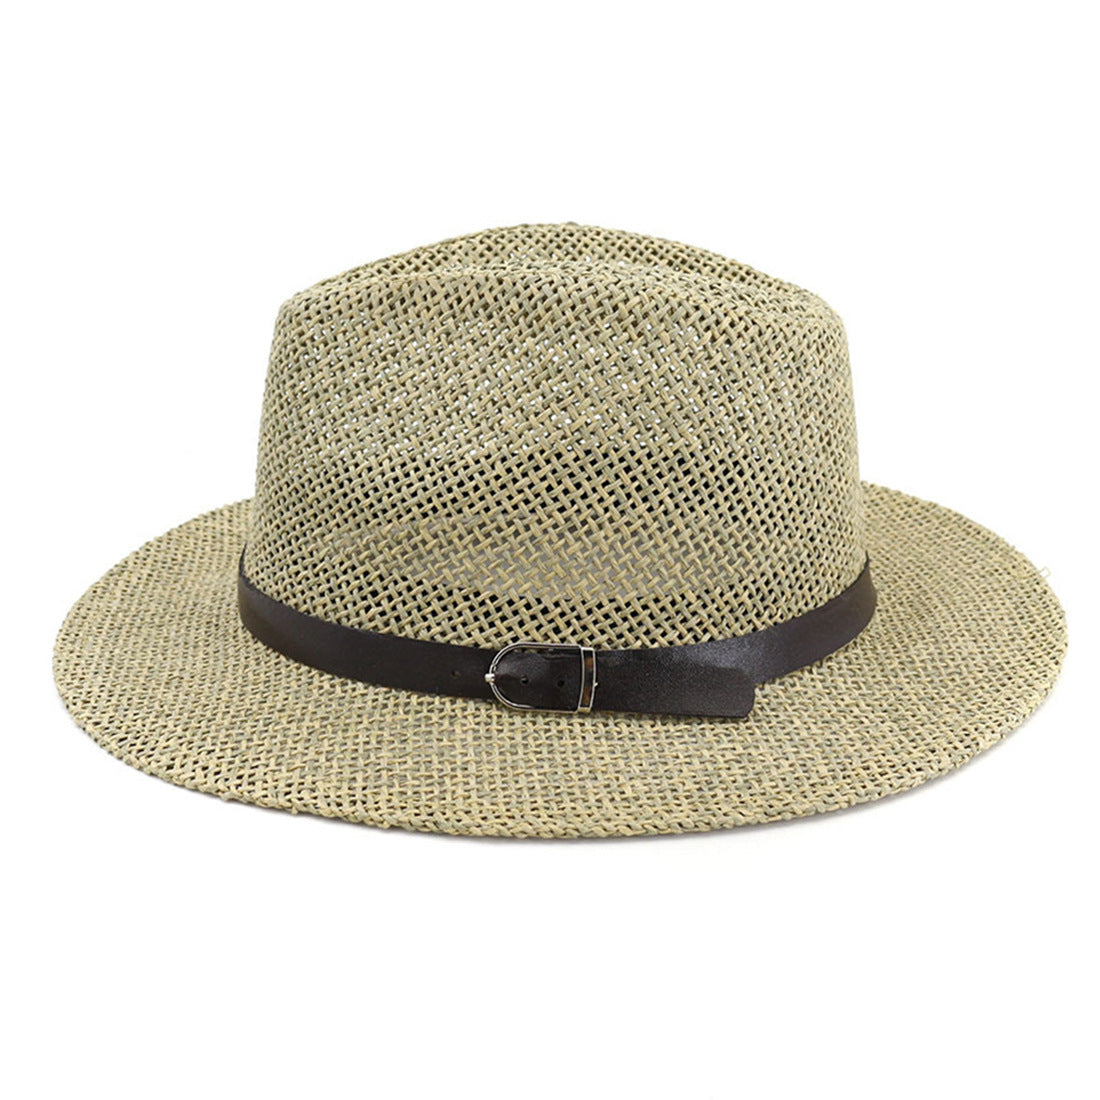 Panama Straw Hat European And American Sun Protection Summer Sun Protection Travel Beach Woven Top Hat